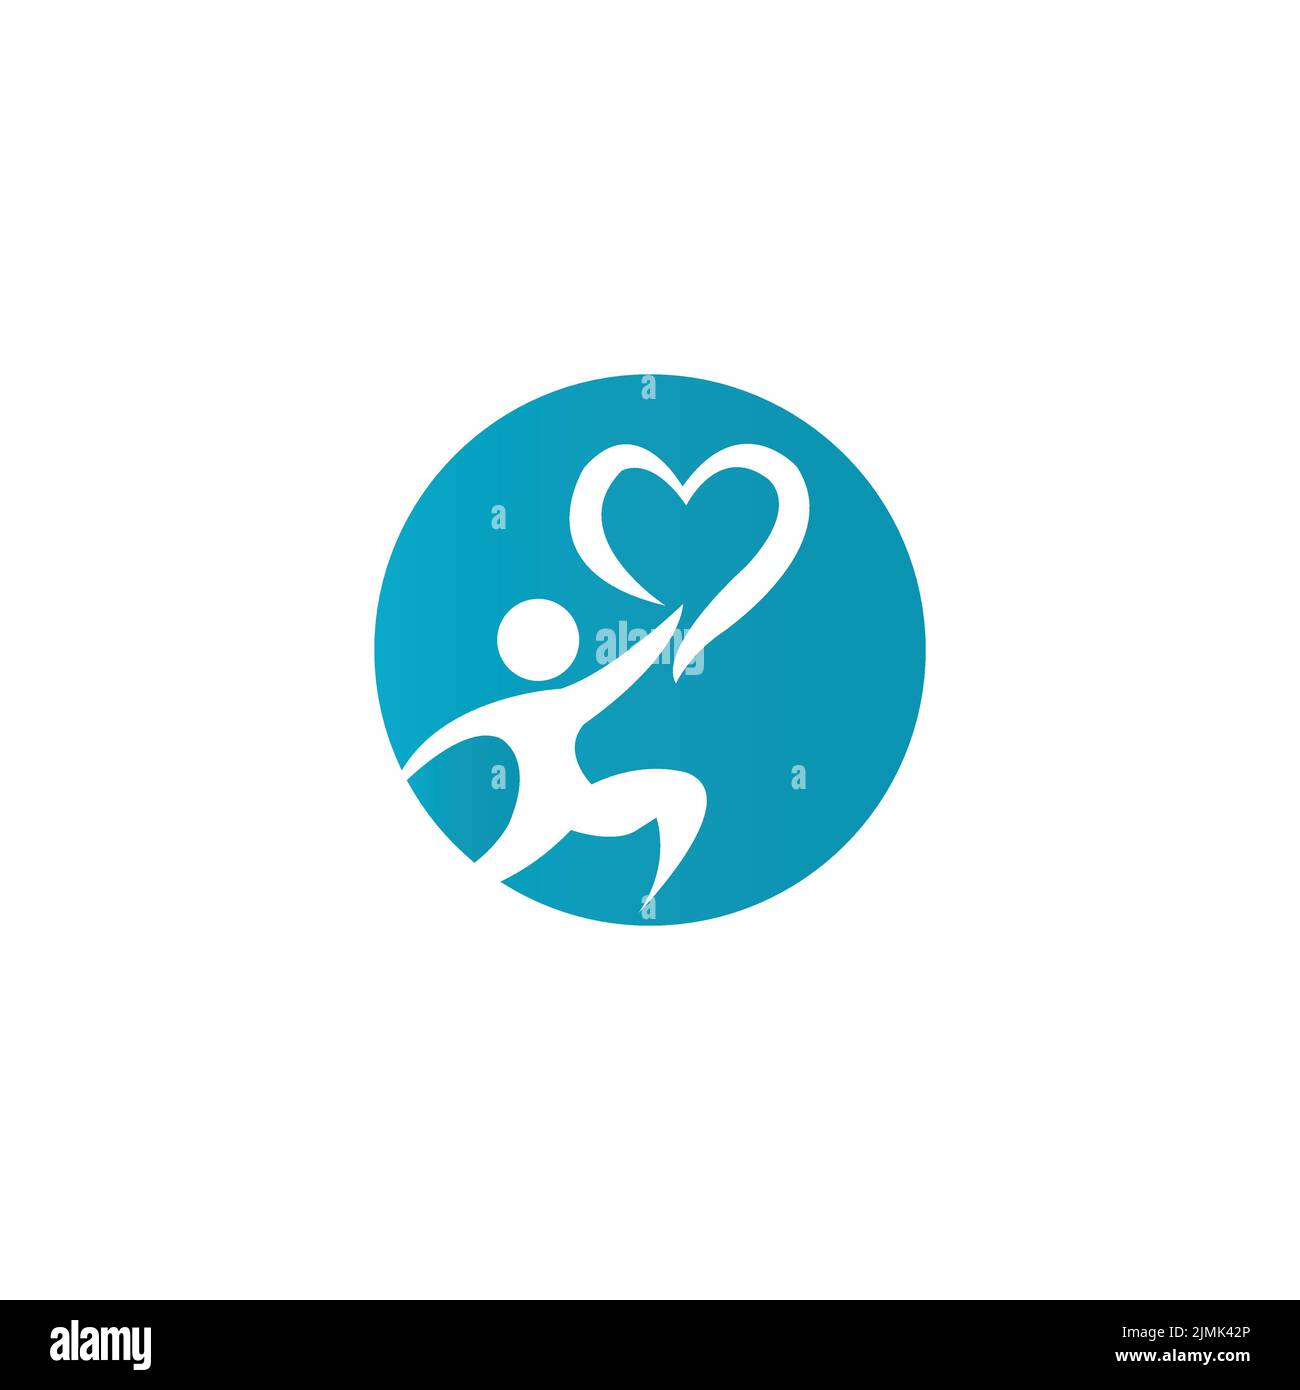 simple adoption and care community logo template vector icon Stock Vector